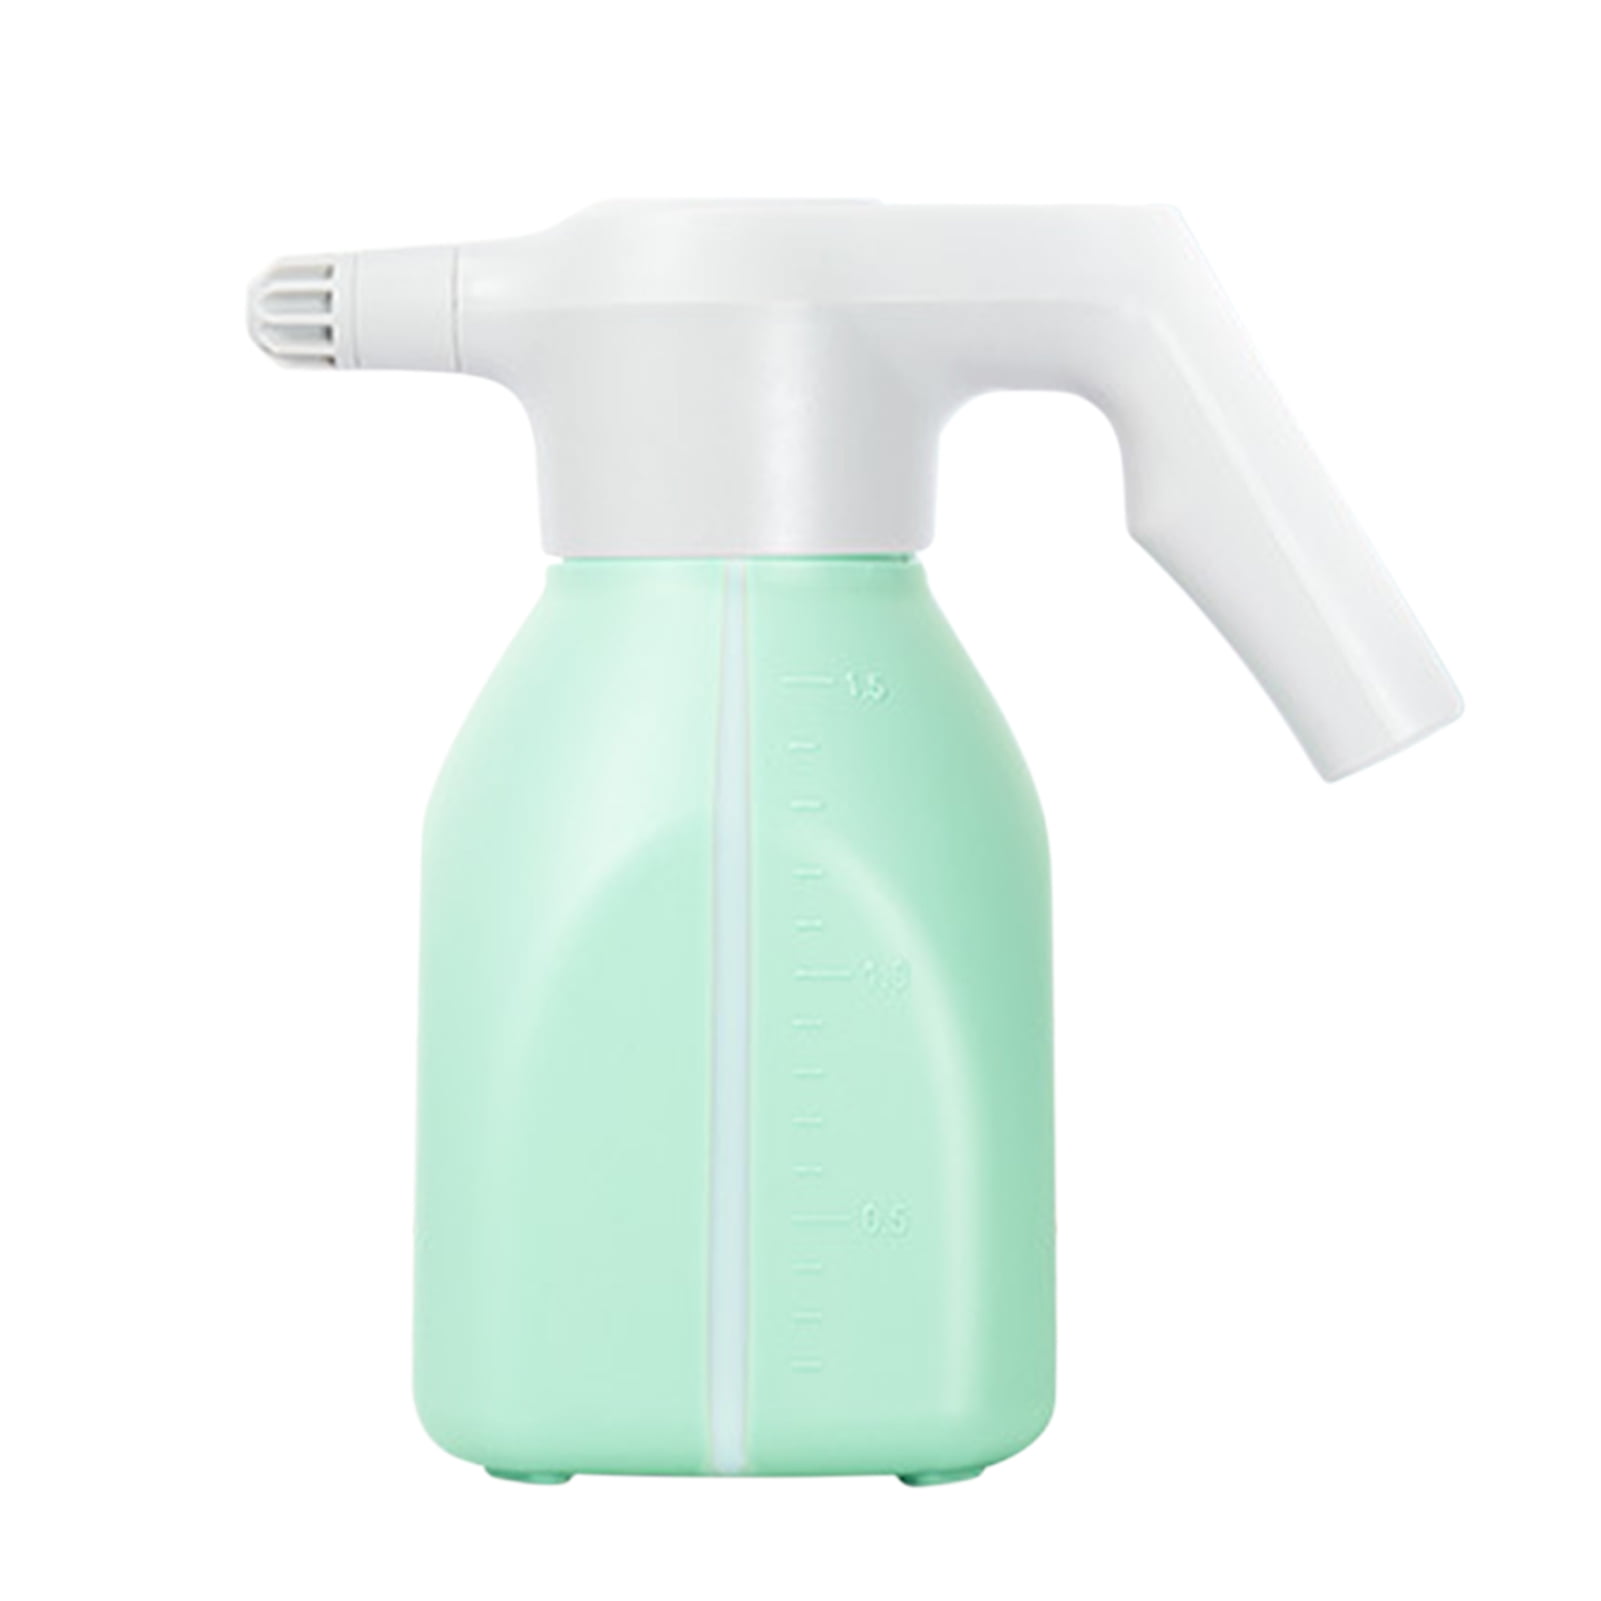 Automatic Spray Bottle Electric Watering Can Adjustable Water Sprayer Mist to Straight White 